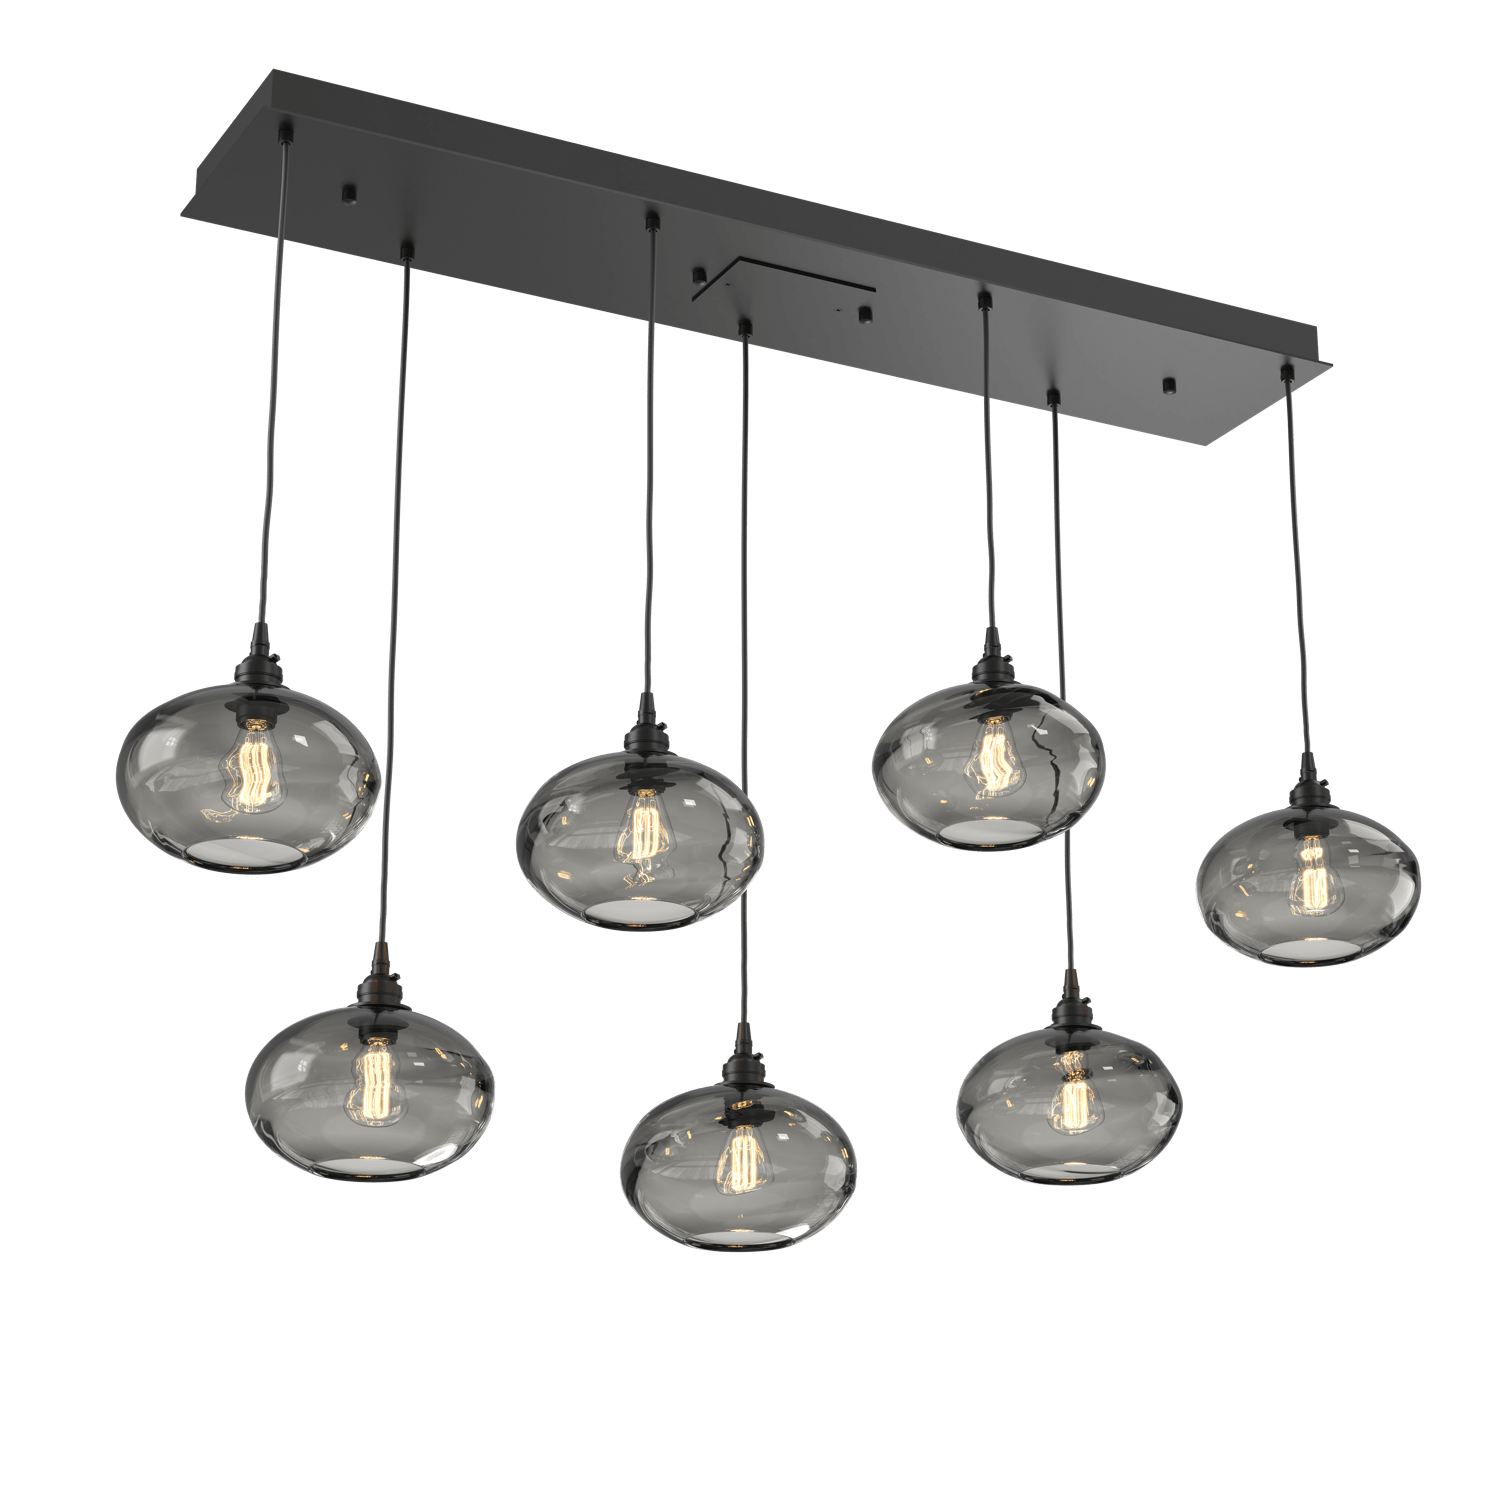 PLB0036-07-MB-OS-Hammerton-Studio-Optic-Blown-Glass-Coppa-7-light-linear-pendant-chandelier-with-matte-black-finish-and-optic-smoke-blown-glass-shades-and-incandescent-lamping